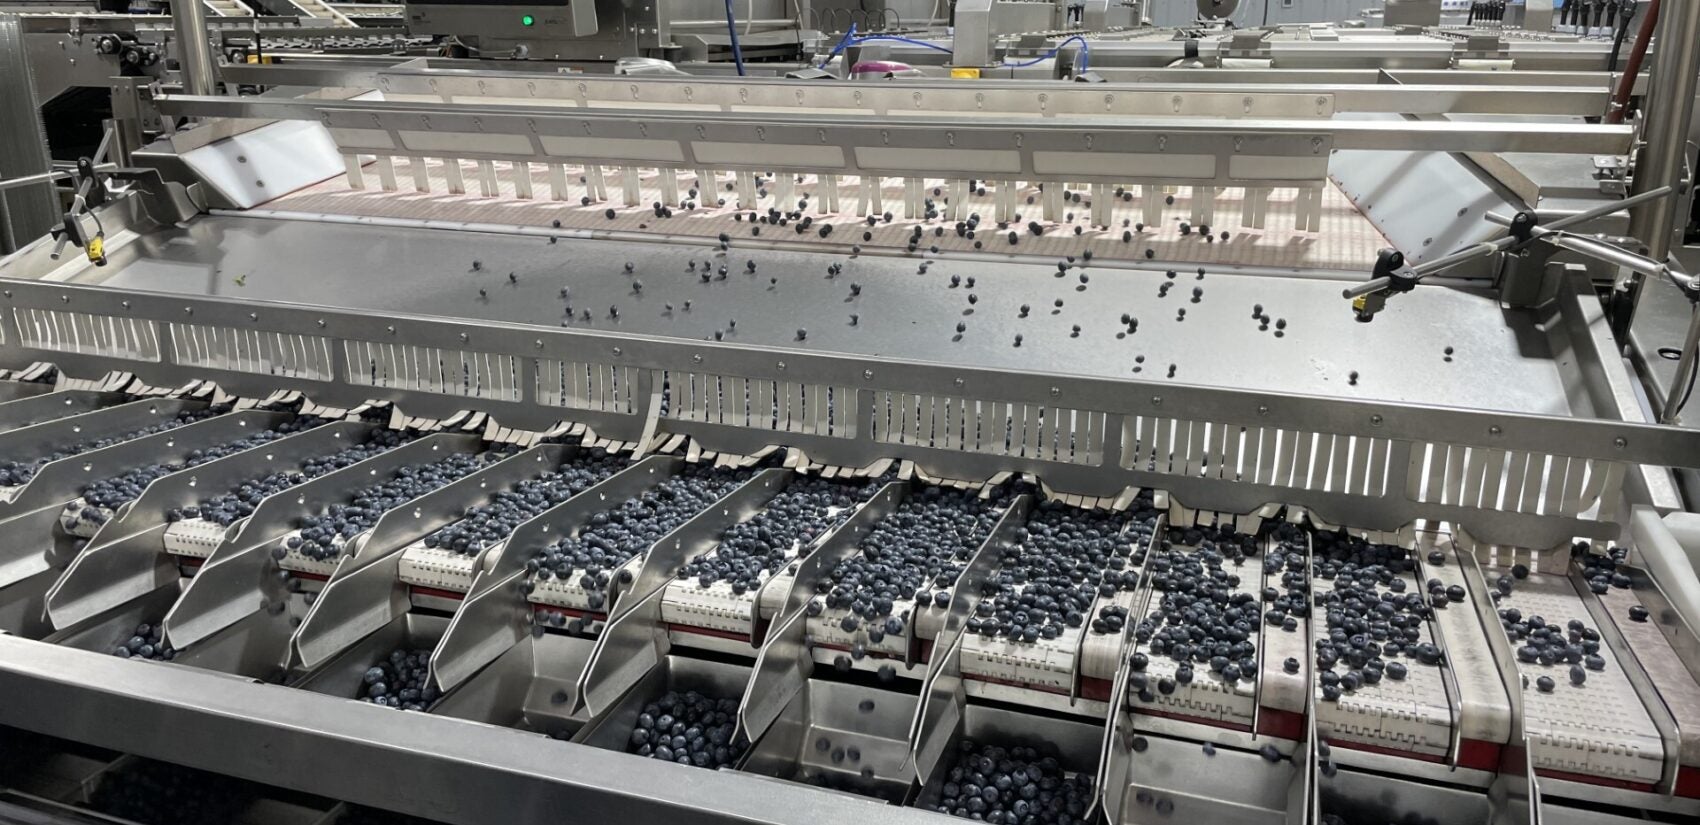 A special machine at Macrie Brothers Blueberry Farm cleans 150 blueberries a second. (David Matthau/WHYY)